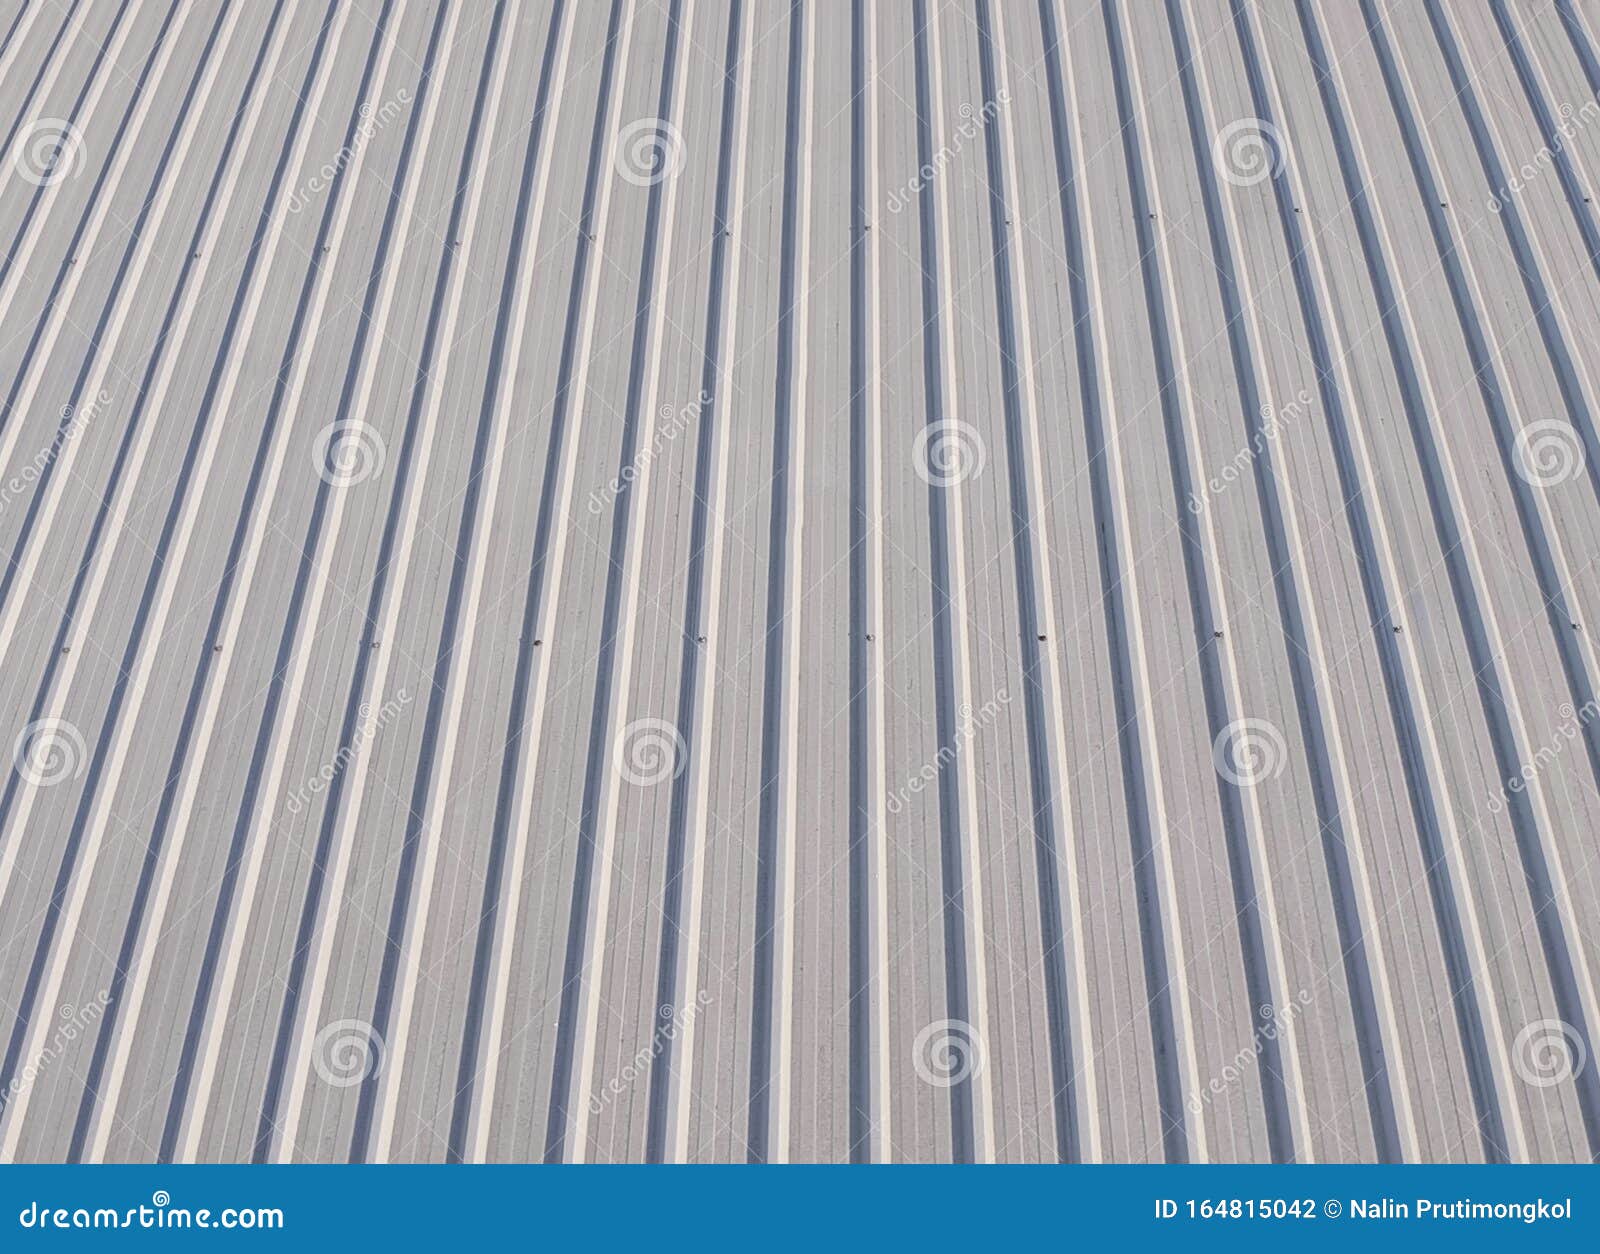 The Roof is Made of Grey Colored Metal Sheet Stock Photo - Image of ...